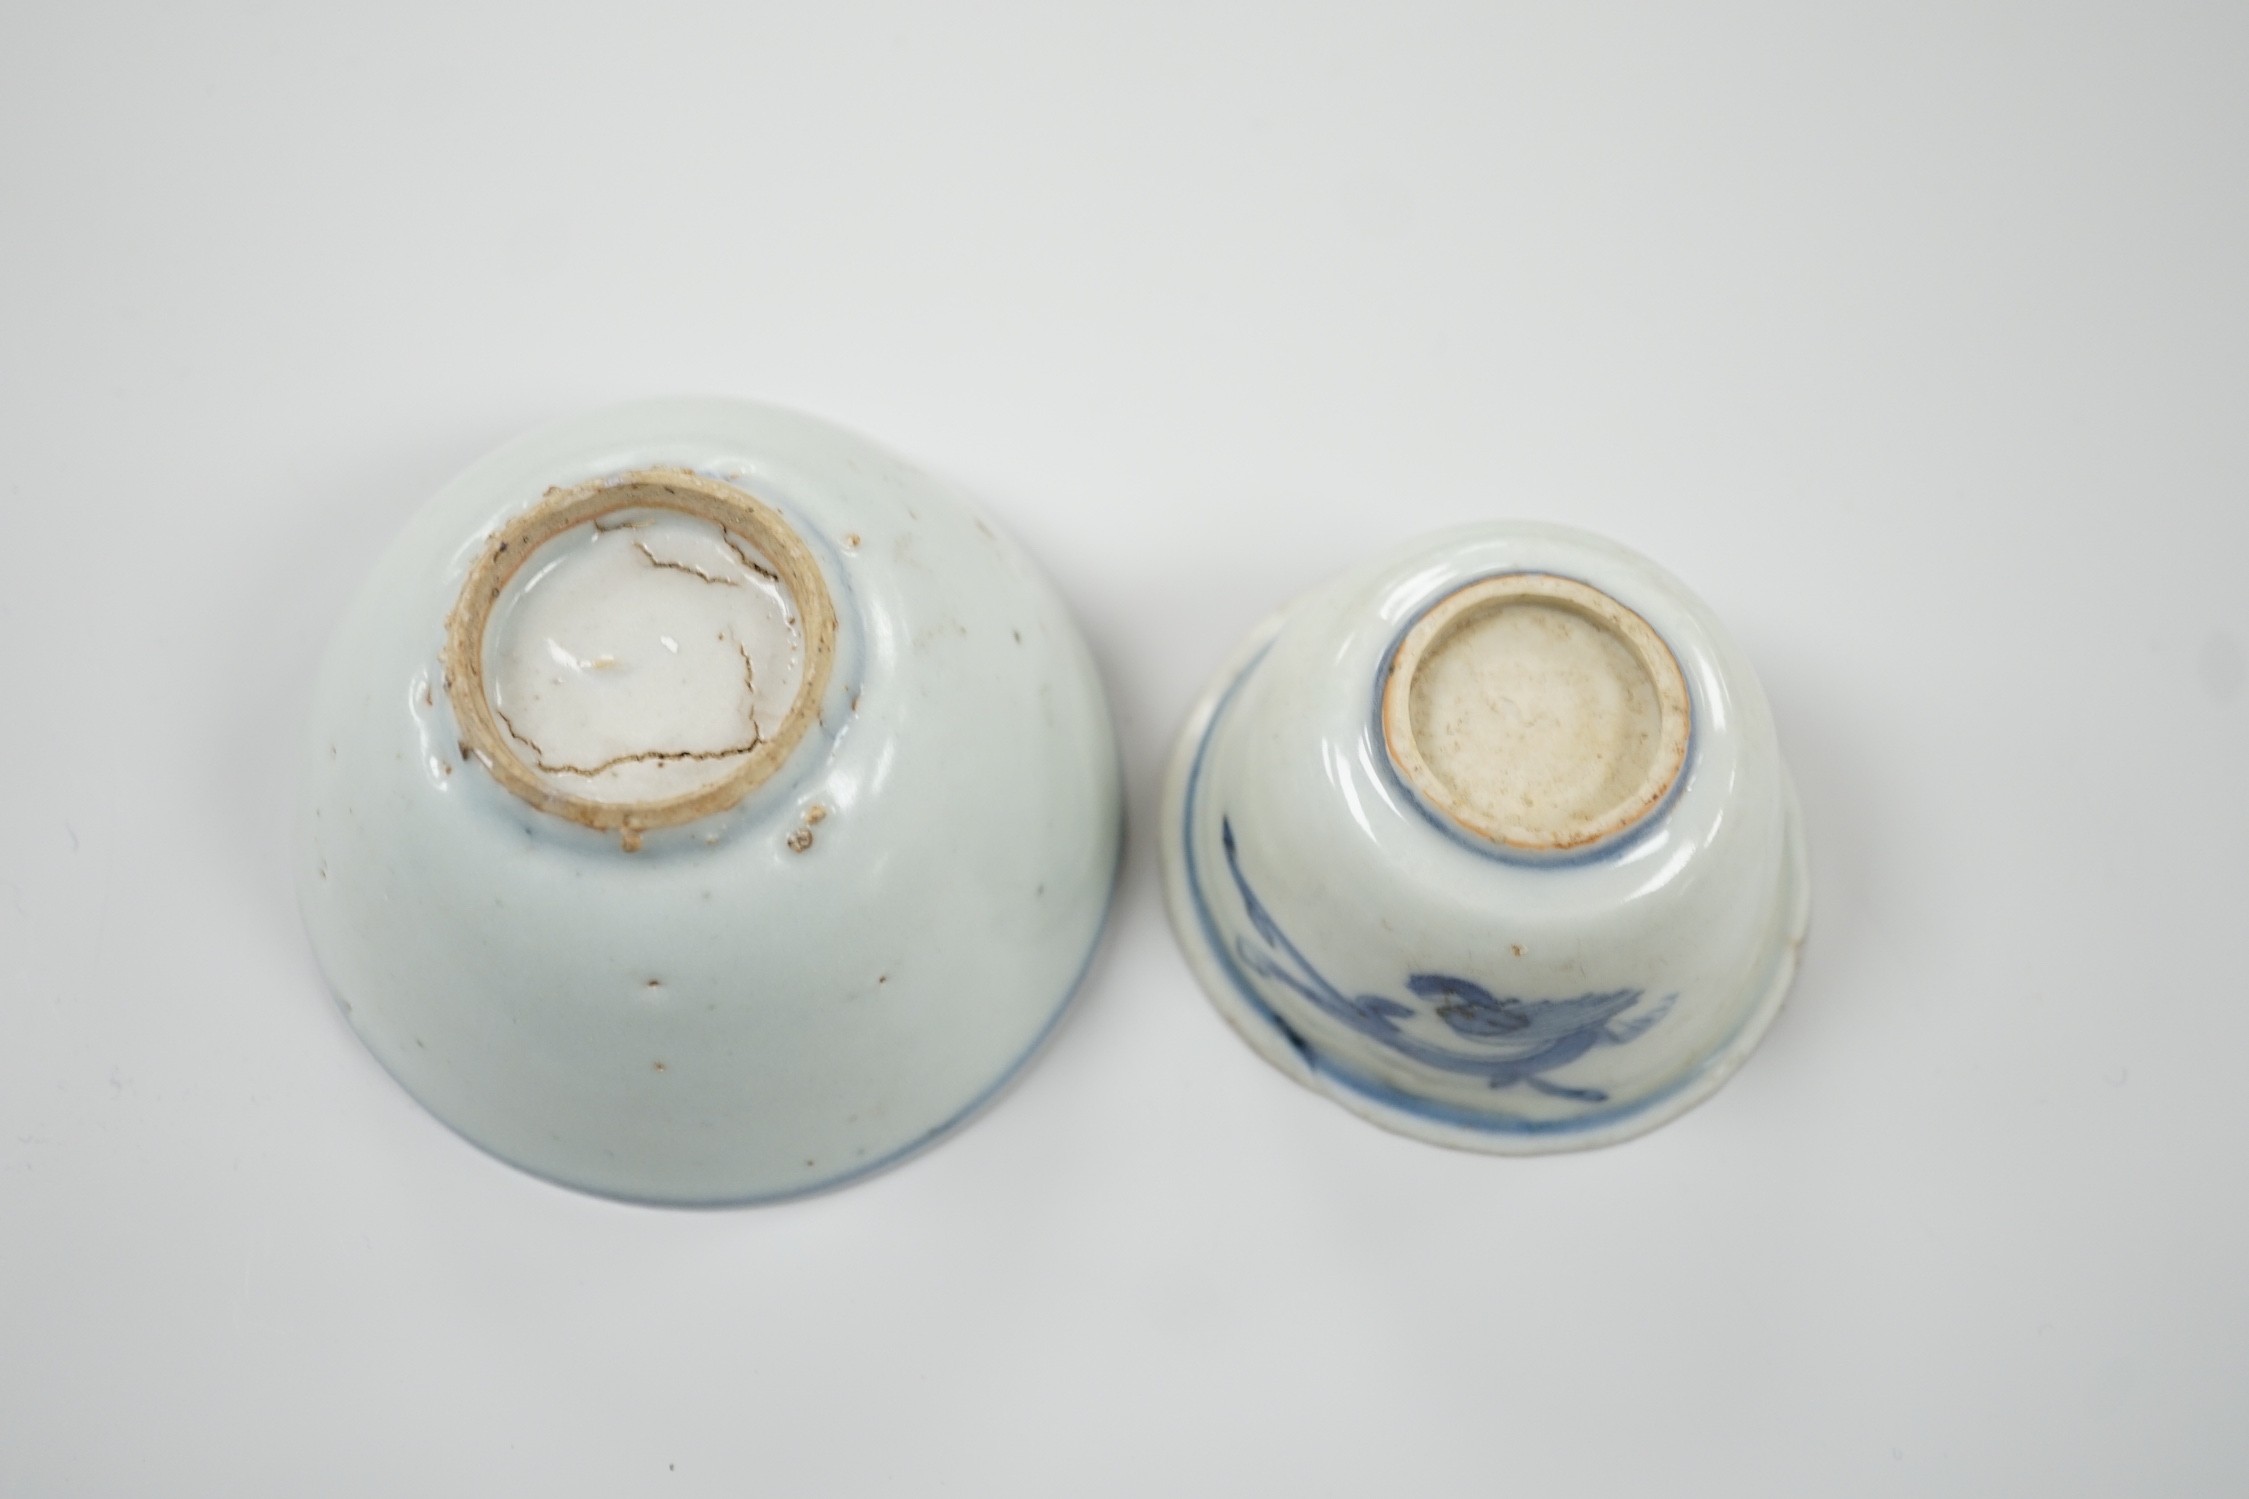 Two Chinese late Ming blue and white tea bowls, Wanli period,. Largest 8.5cm diameter